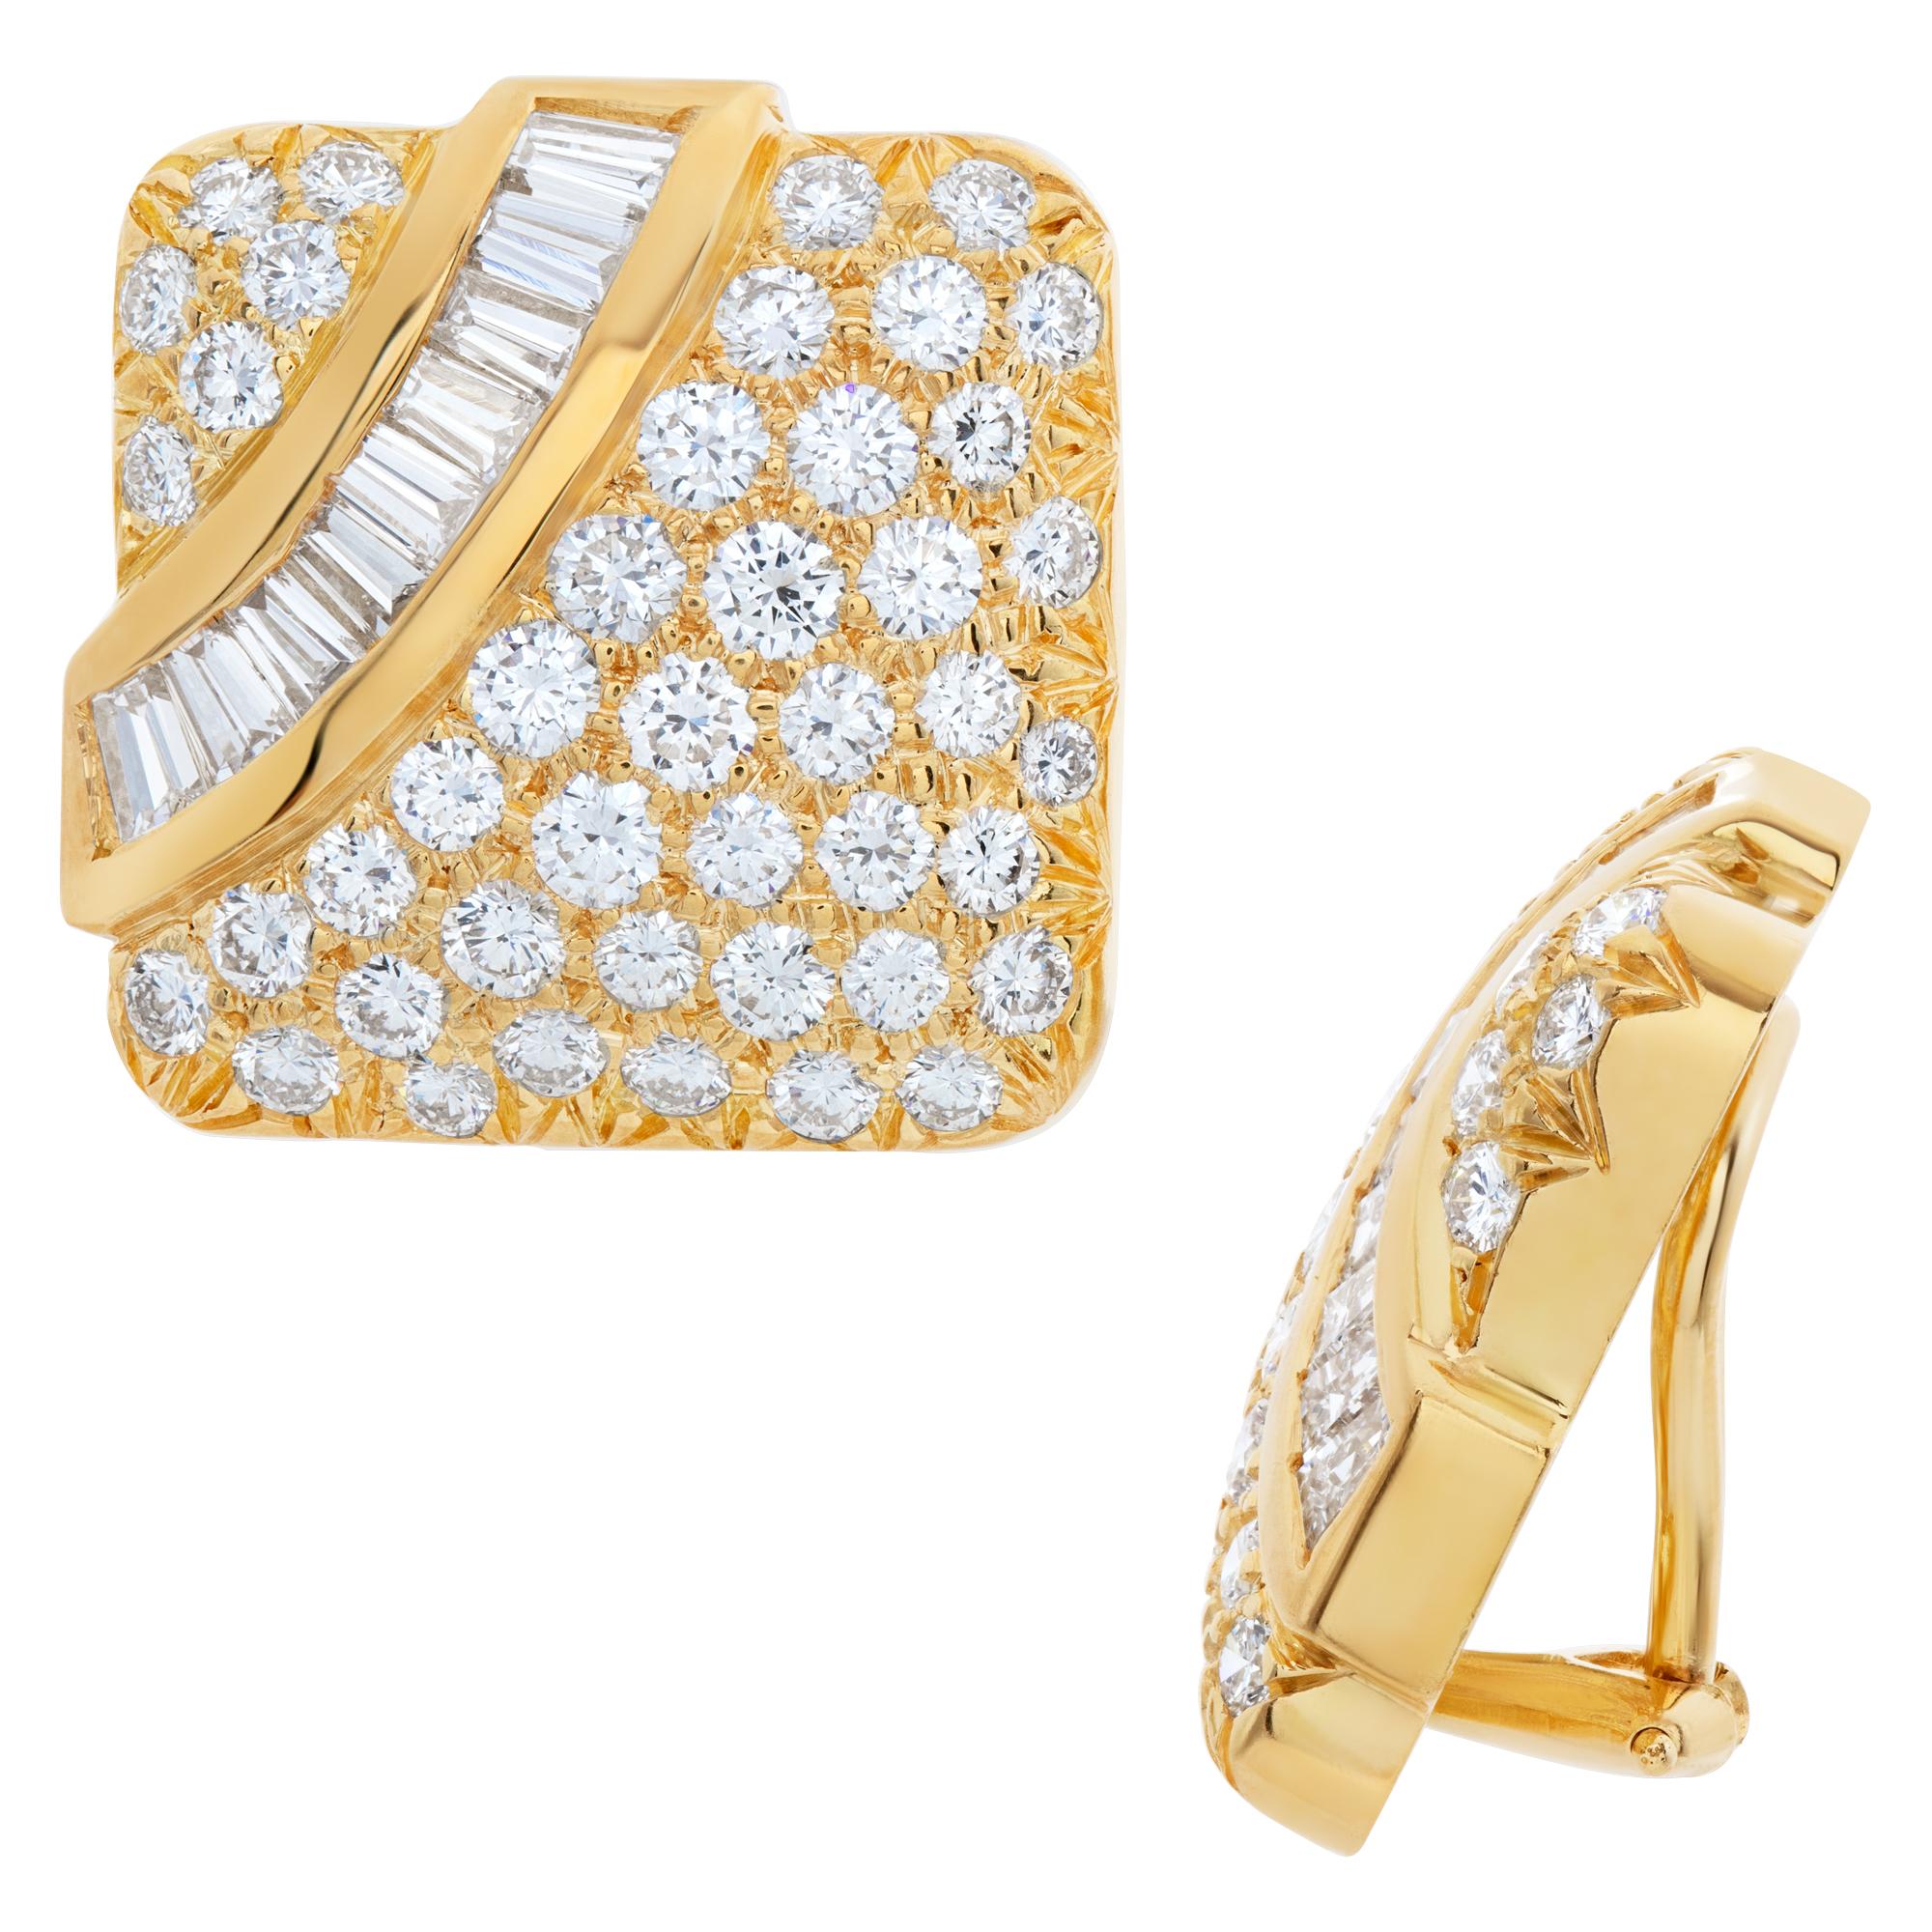 Square Diamond Clip on Earrings in 18k Gold In Excellent Condition For Sale In Surfside, FL